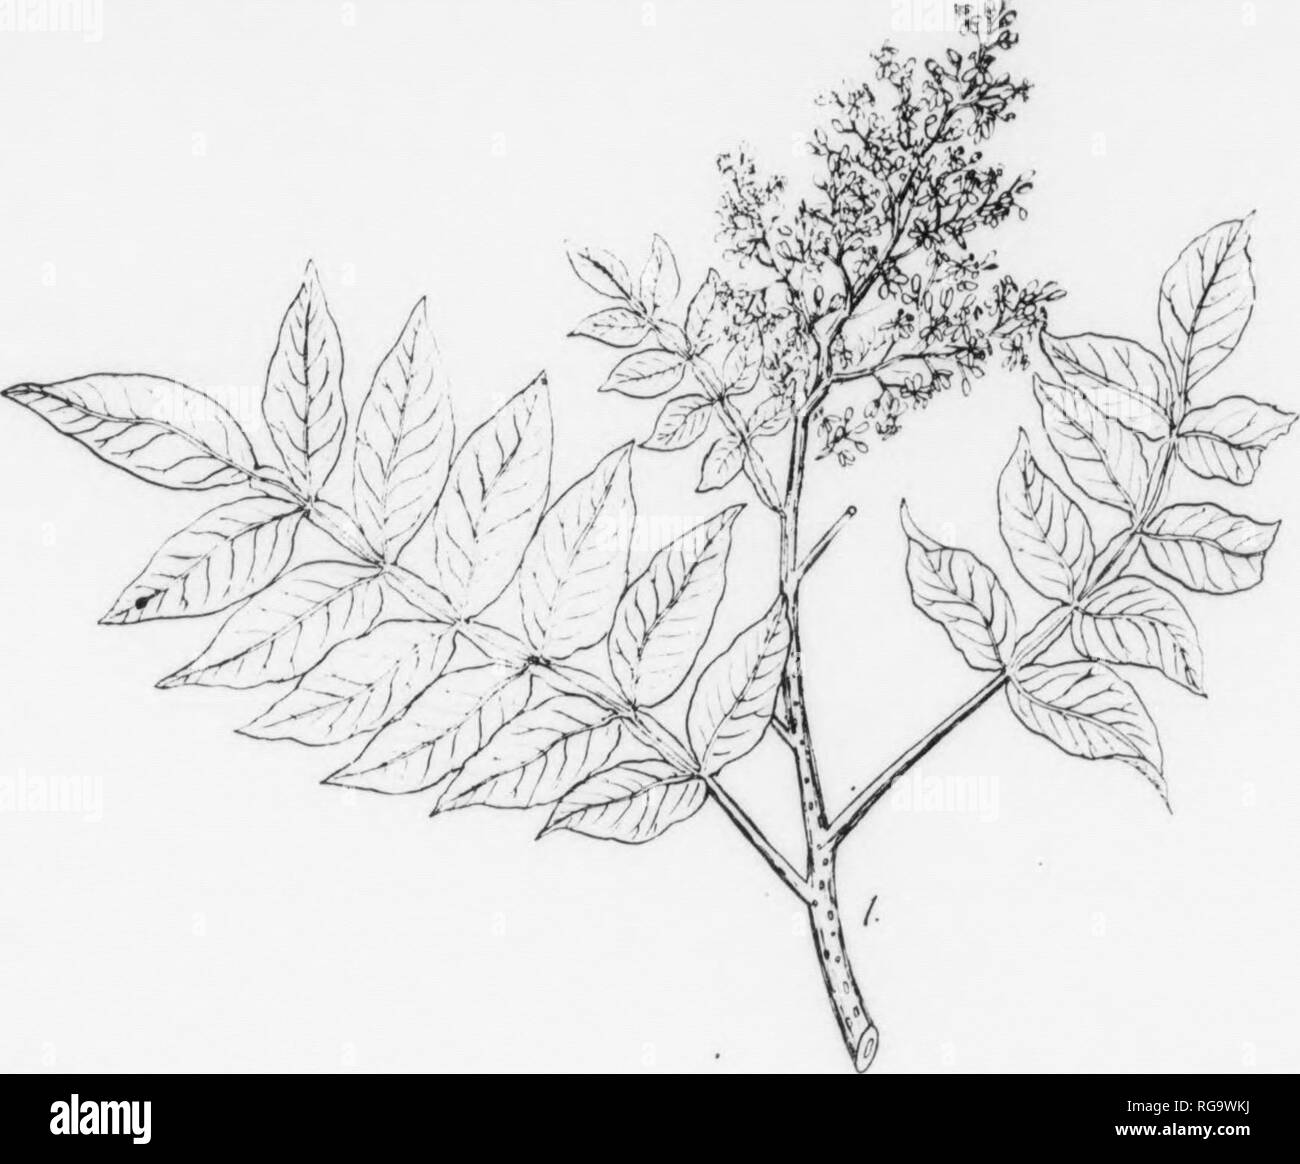 . Bulletin (Pennsylvania Department of Forestry), no. 11. Forests and forestry. 11 III 192 DWARF SUMACH Rhus copallina, Linnaeus FORM—A small shrub rnrely more than 6-8 ft. tall; becomes a tree only in Arkansas and Texas. BARK—Rather thin, light to reddish-browTi, often 8tiHM)th; on older specimens may peel off into papery layers, frequently roughened by large, elervated, bro^vnlsh projections. TWIGS—At first hairy, somewhat zigzag and greenish-rod; later smooth, reddish-brown, and roughened by prominent leaf-scars and large d.irk-coiored lenticels; frequently roughened by large elevated rugop Stock Photo